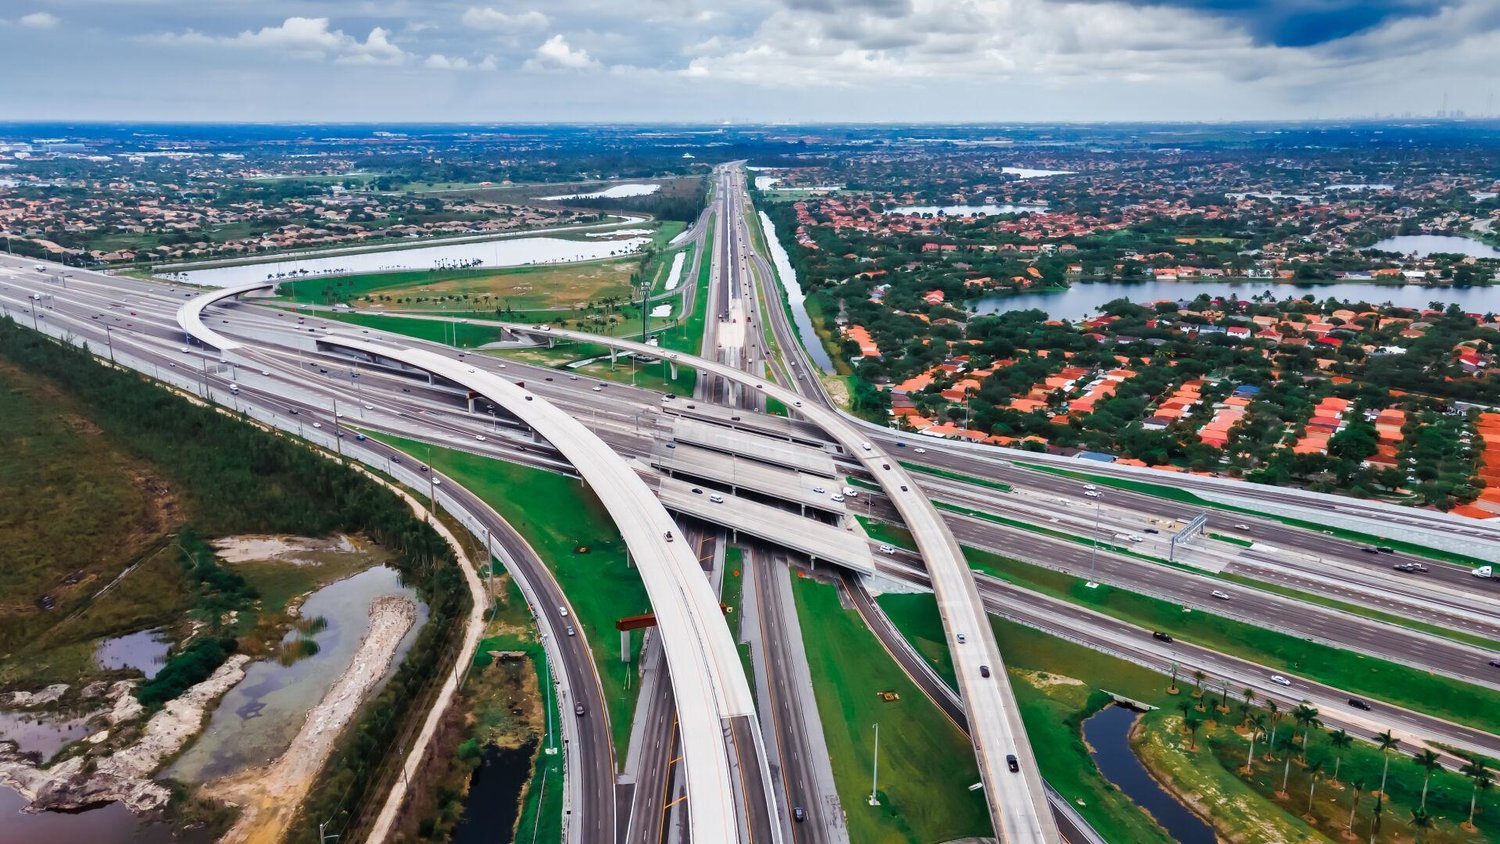 Interstate 95 meets the Florida Turnpike in south Florida.